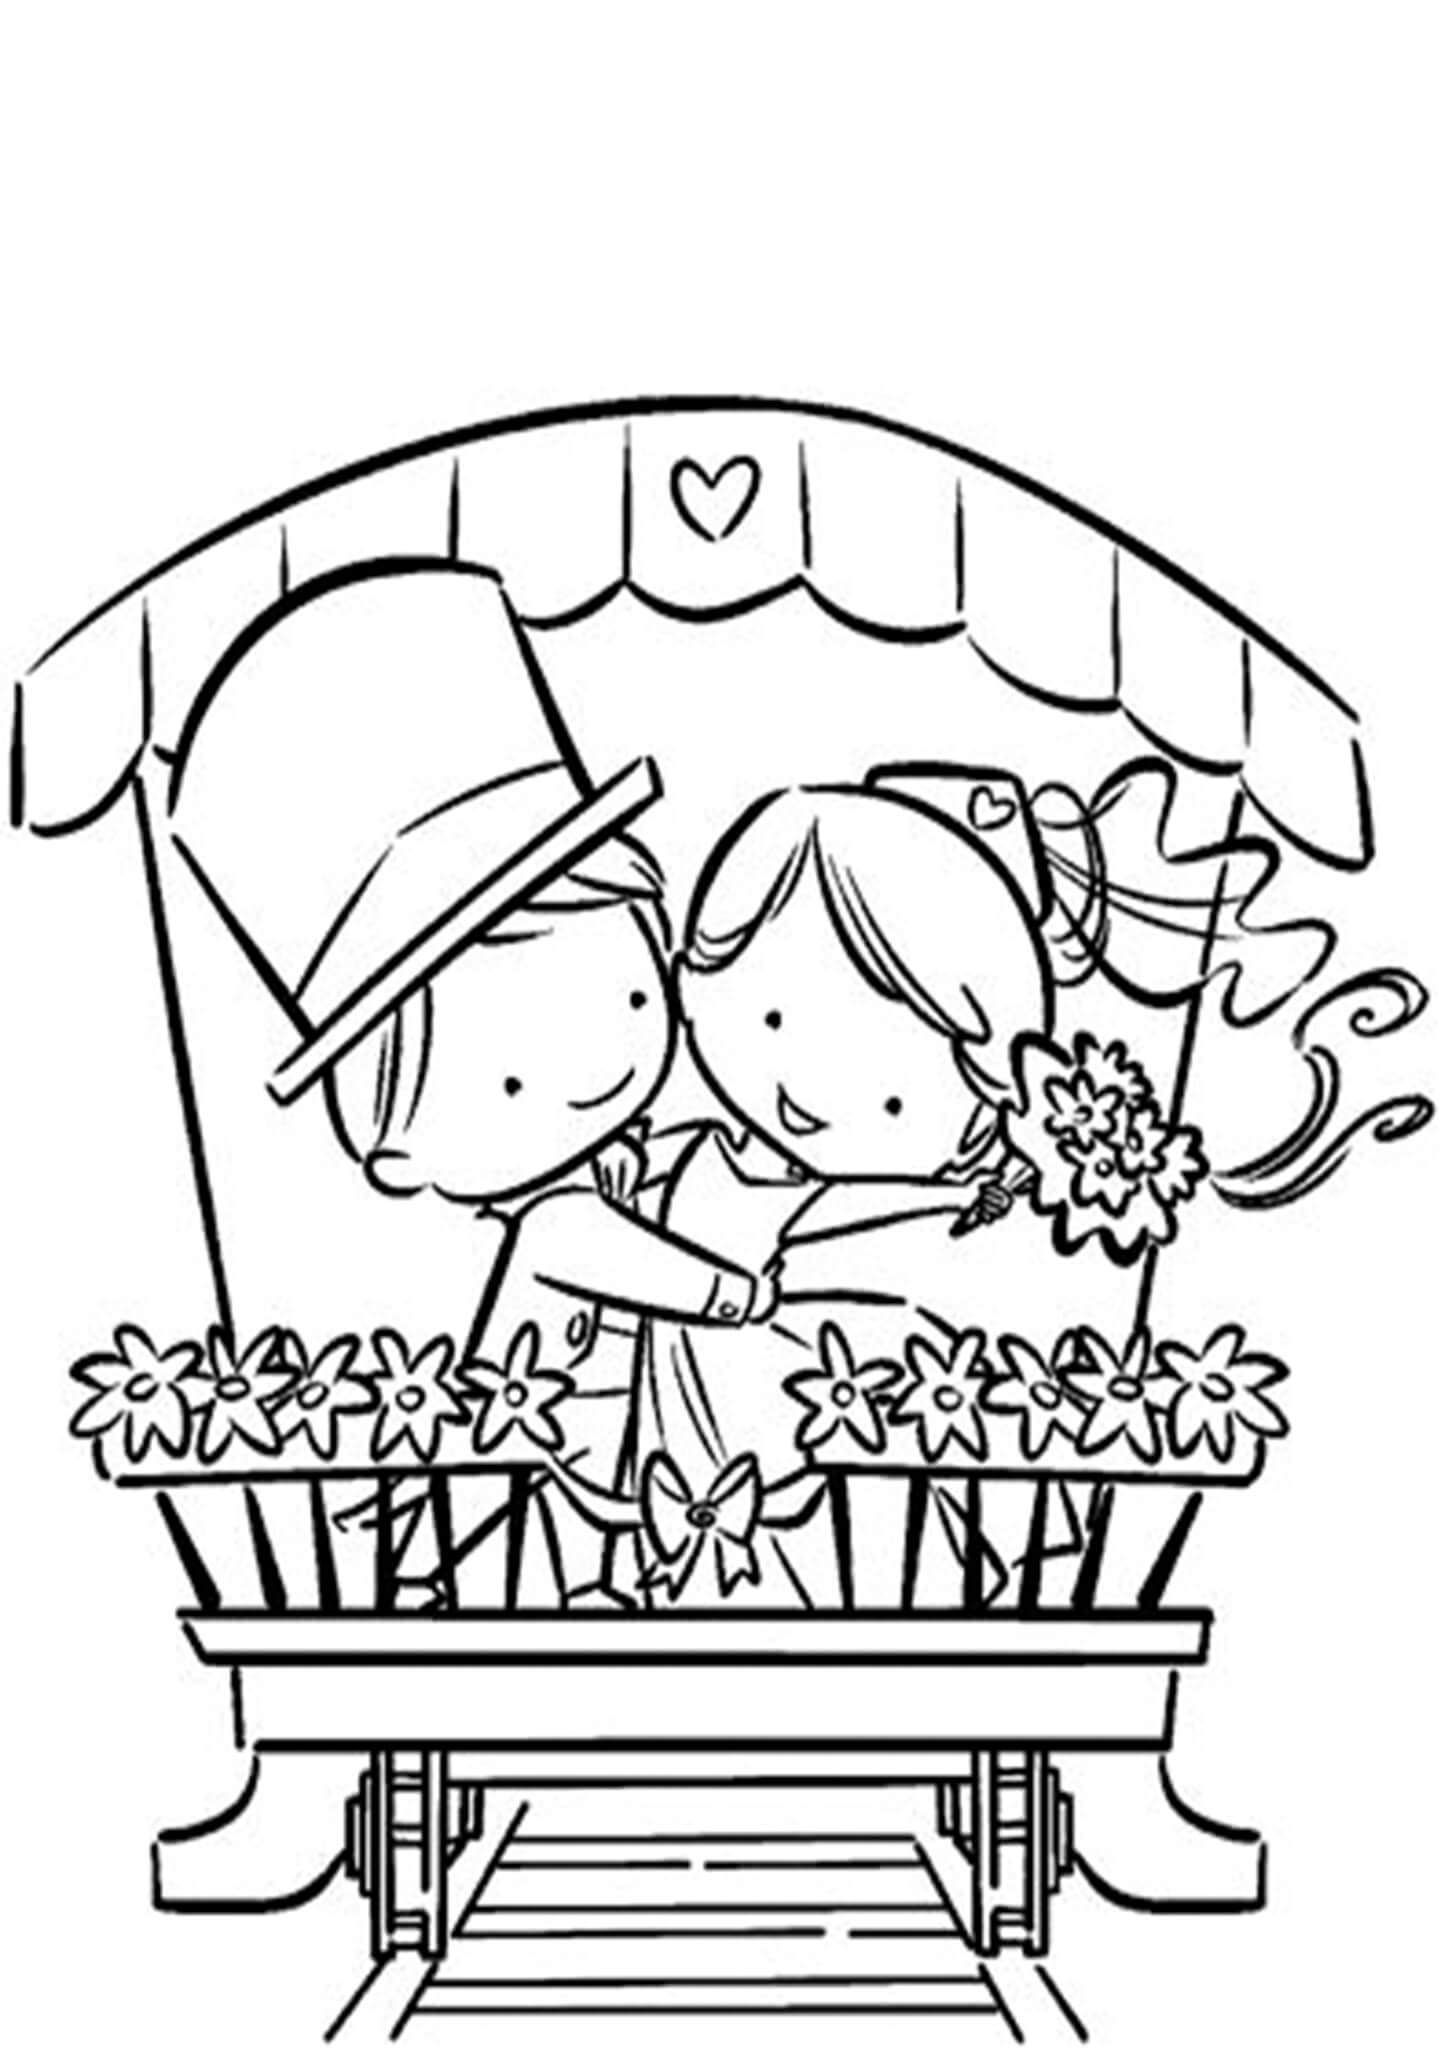 Free & Easy To Print Wedding Coloring Pages   Tulamama